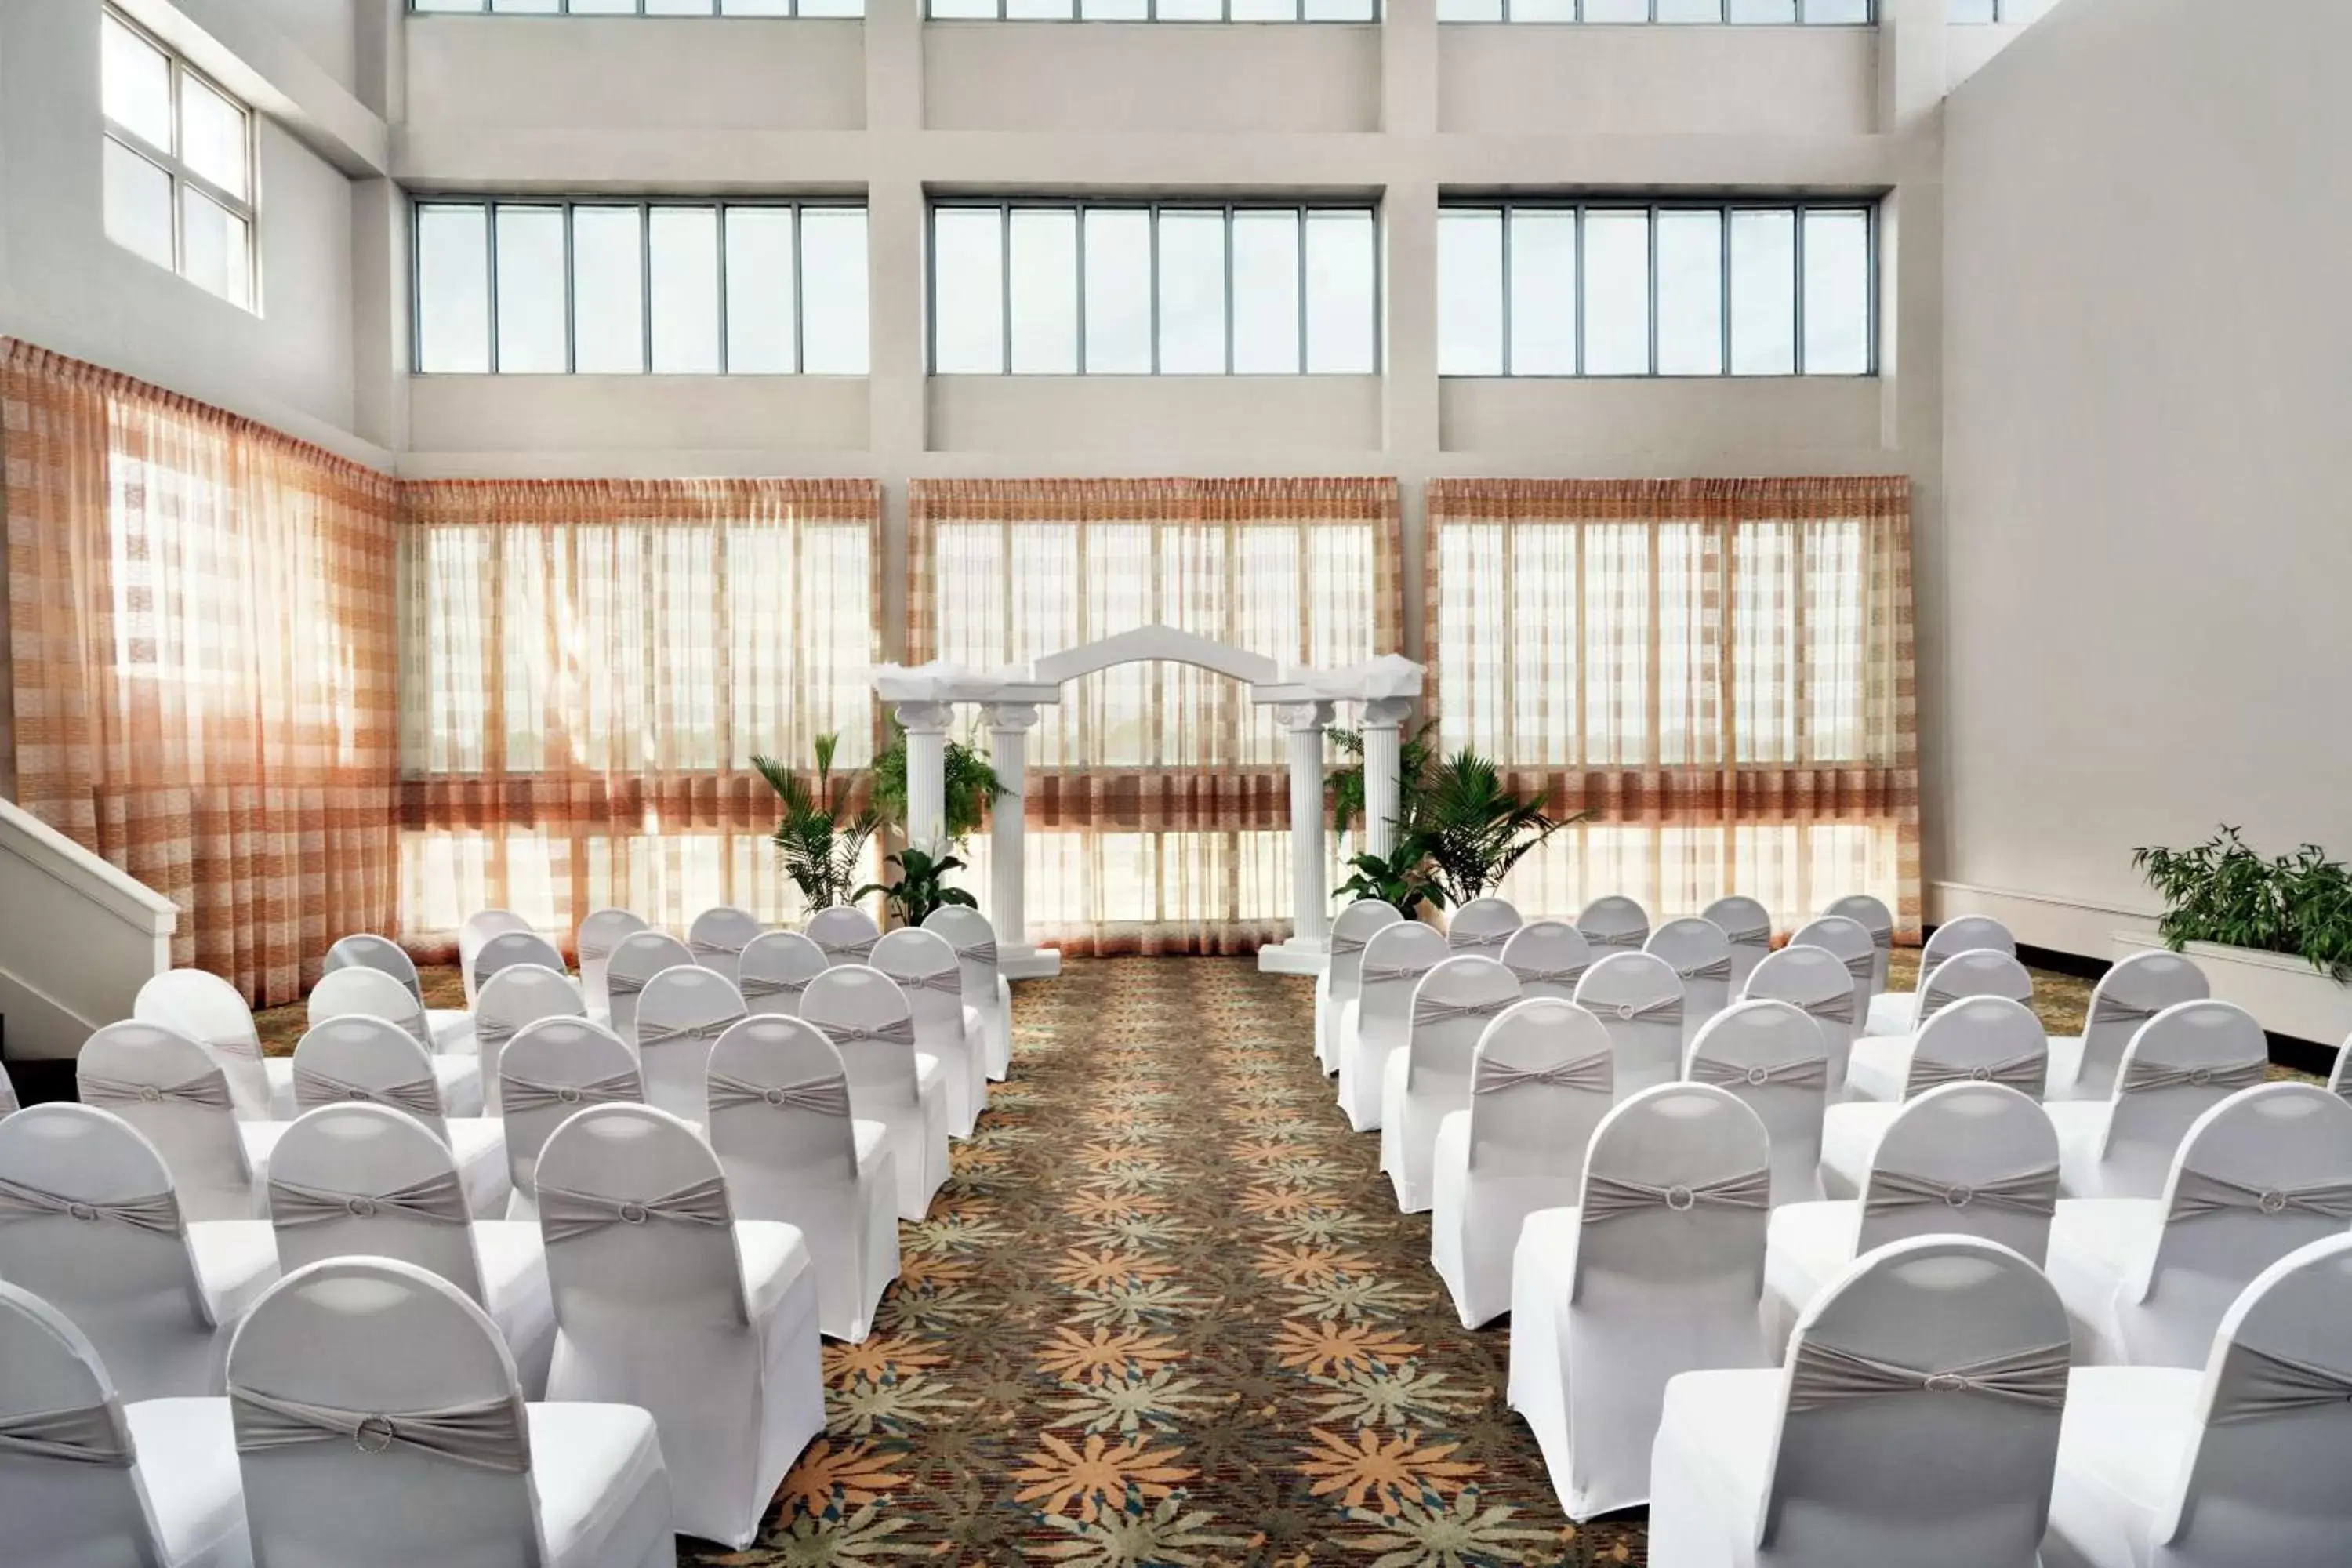 Meeting/conference room, Banquet Facilities in Embassy Suites Brunswick